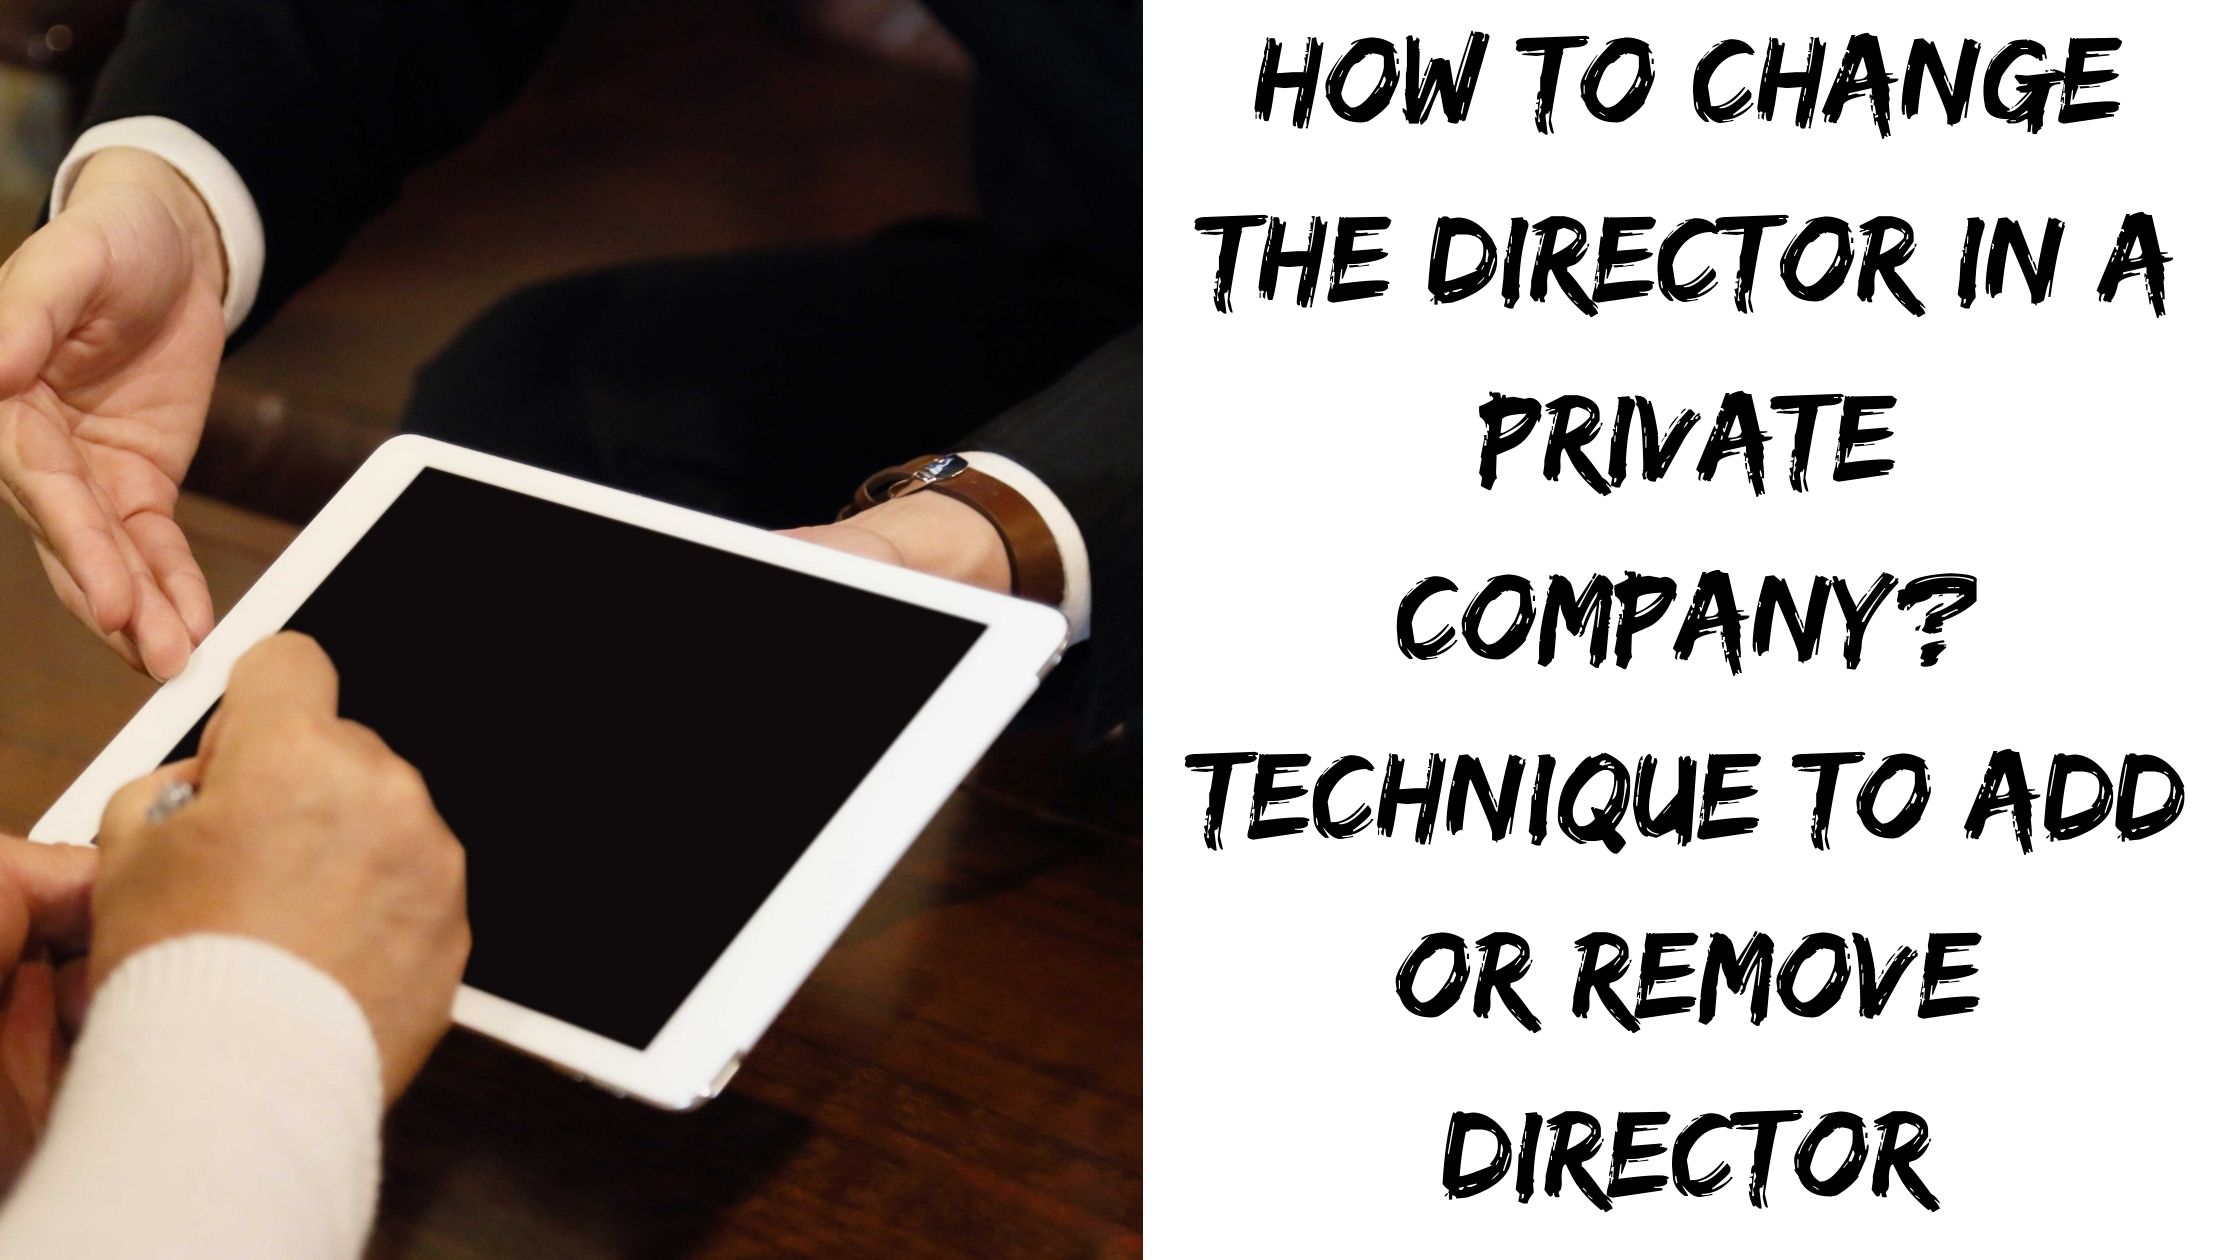 How to Change the Director in a Private Company? Technique to Add or Remove Director